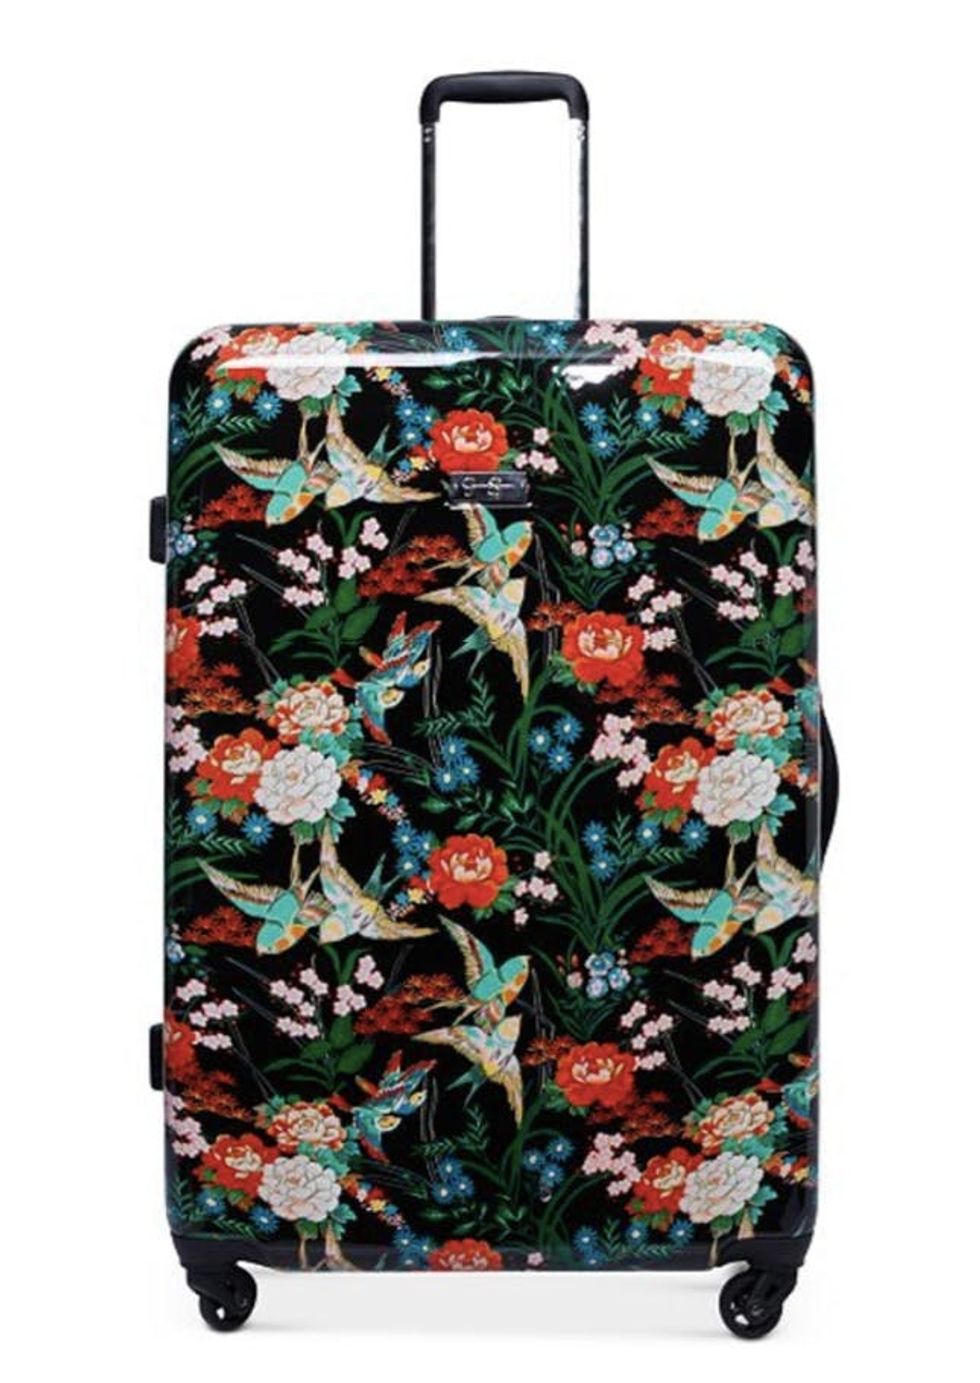 11 Fly Luggage Pieces for the Jetsetter in You - Brit + Co